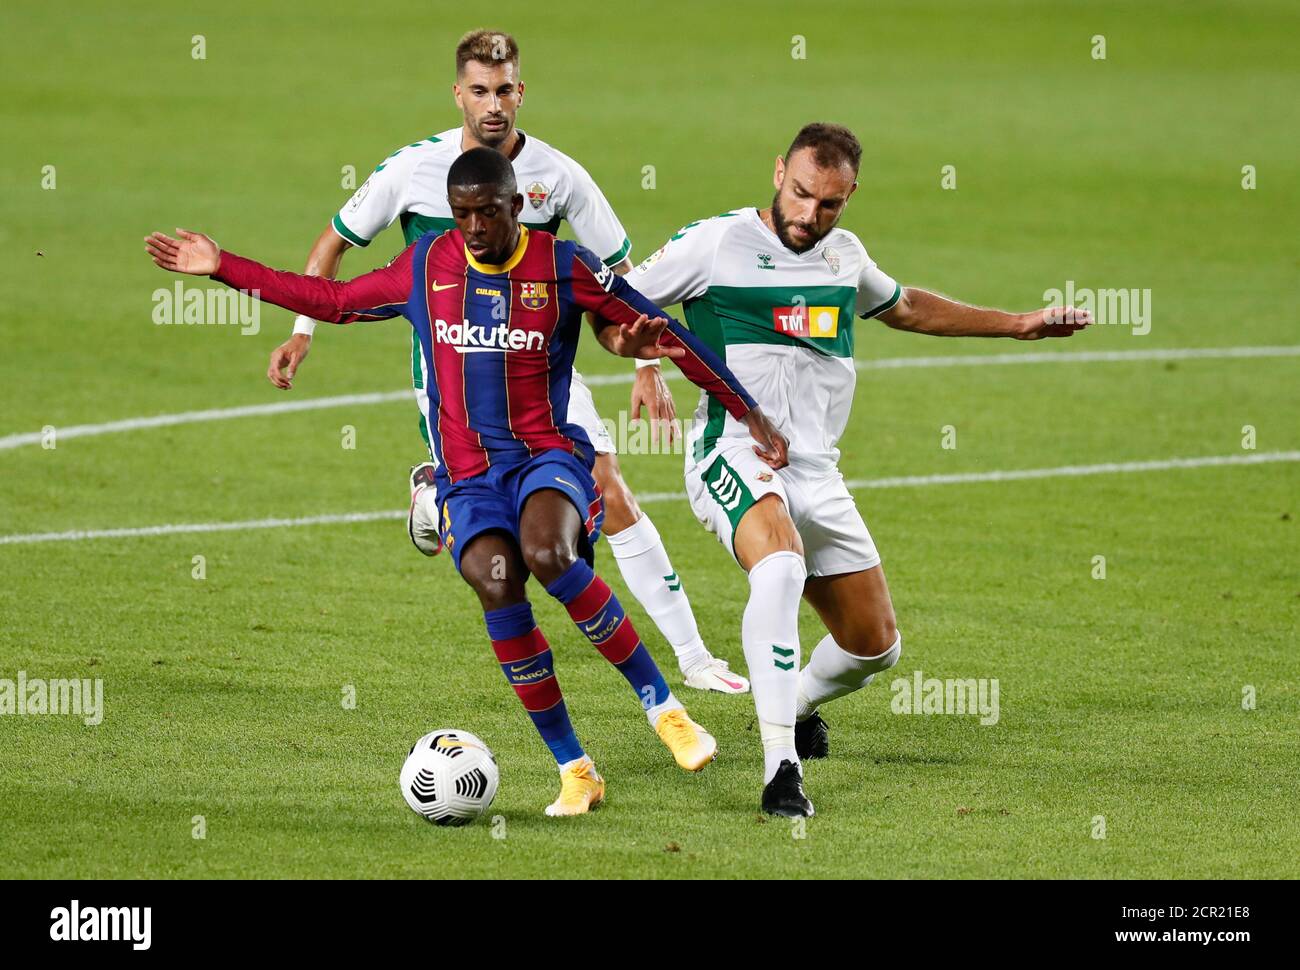 Barcelona, Barcelona, Spain. 19th Sep, 2020. Dembele of FC Barcelona in action during the Gamper Trophy match between FC Barcelona and Elche at Camp Nou on September 19, 2020 in Barcelona, Spain. Credit: David Ramirez/DAX/ZUMA Wire/Alamy Live News Stock Photo